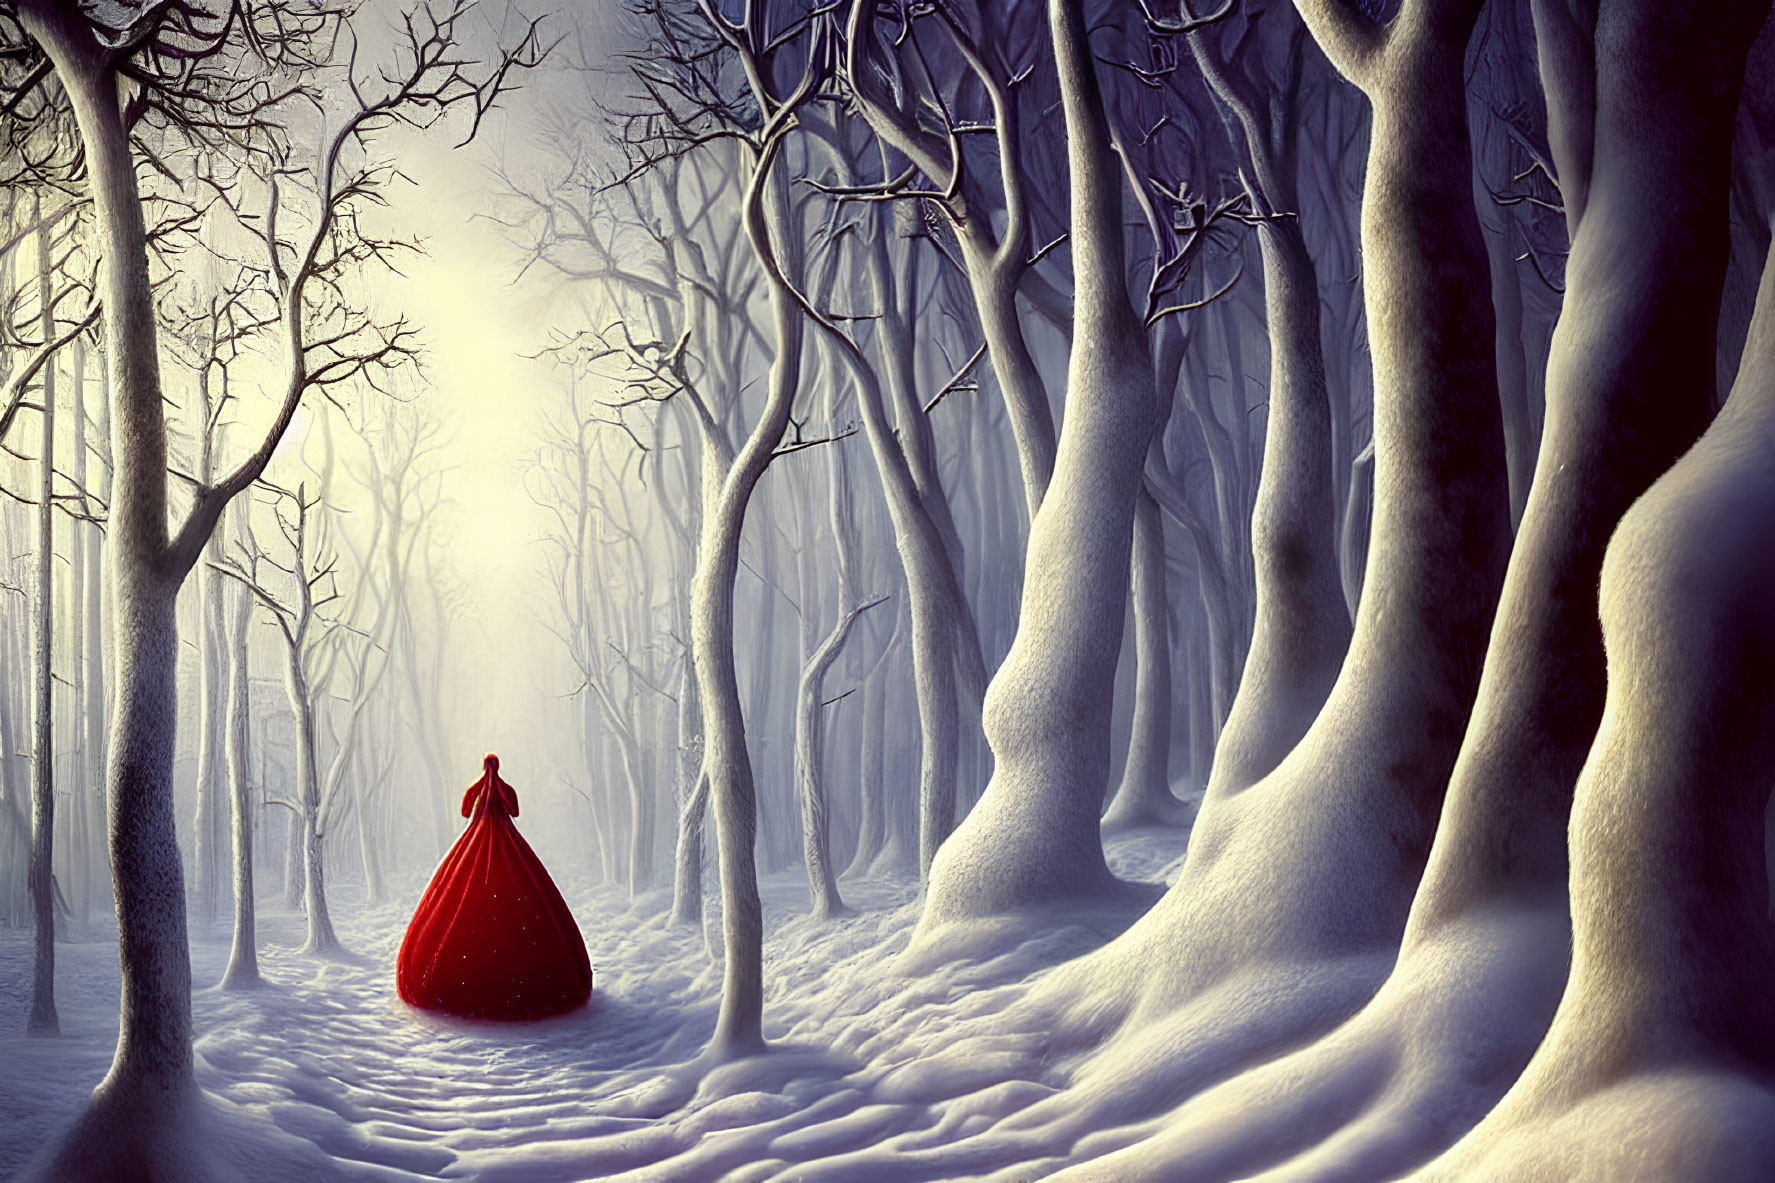 Solitary figure in red cloak in snow-covered woodland